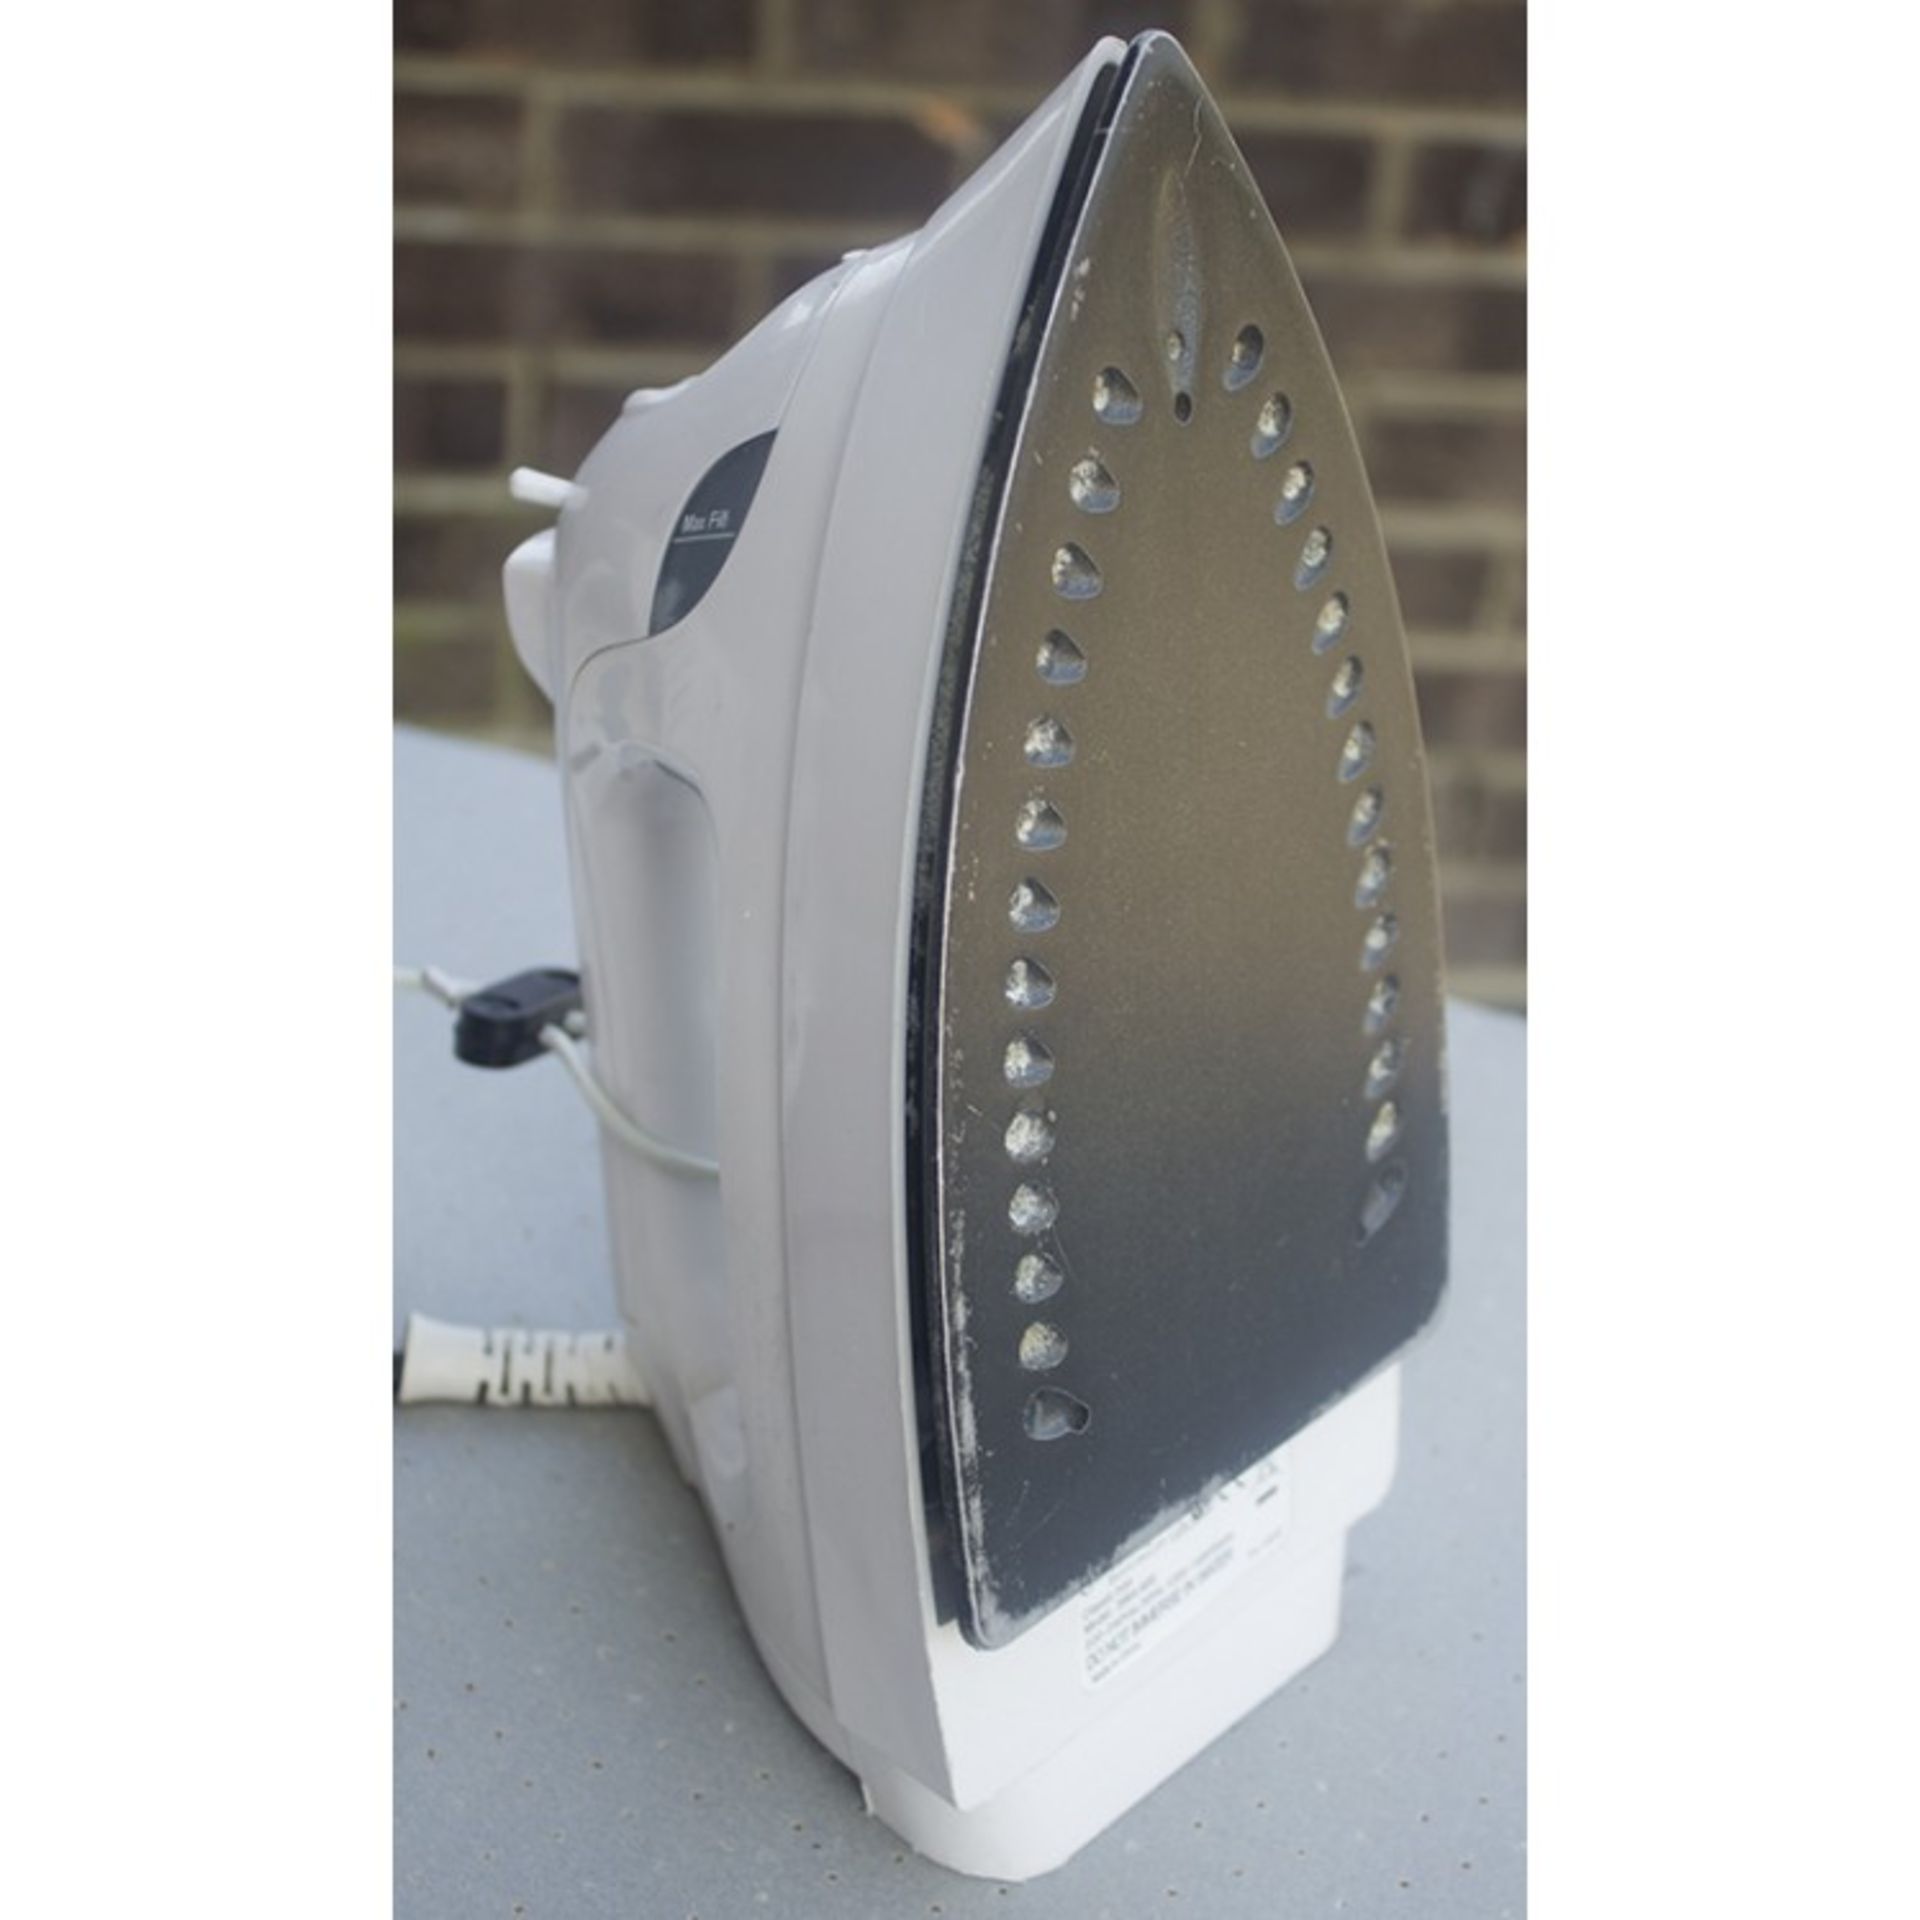 100 x  Iron Board With Iron

Ex Hotel Iron with ironing board, Prevents Iron Burn Damage and Iron - Image 3 of 4